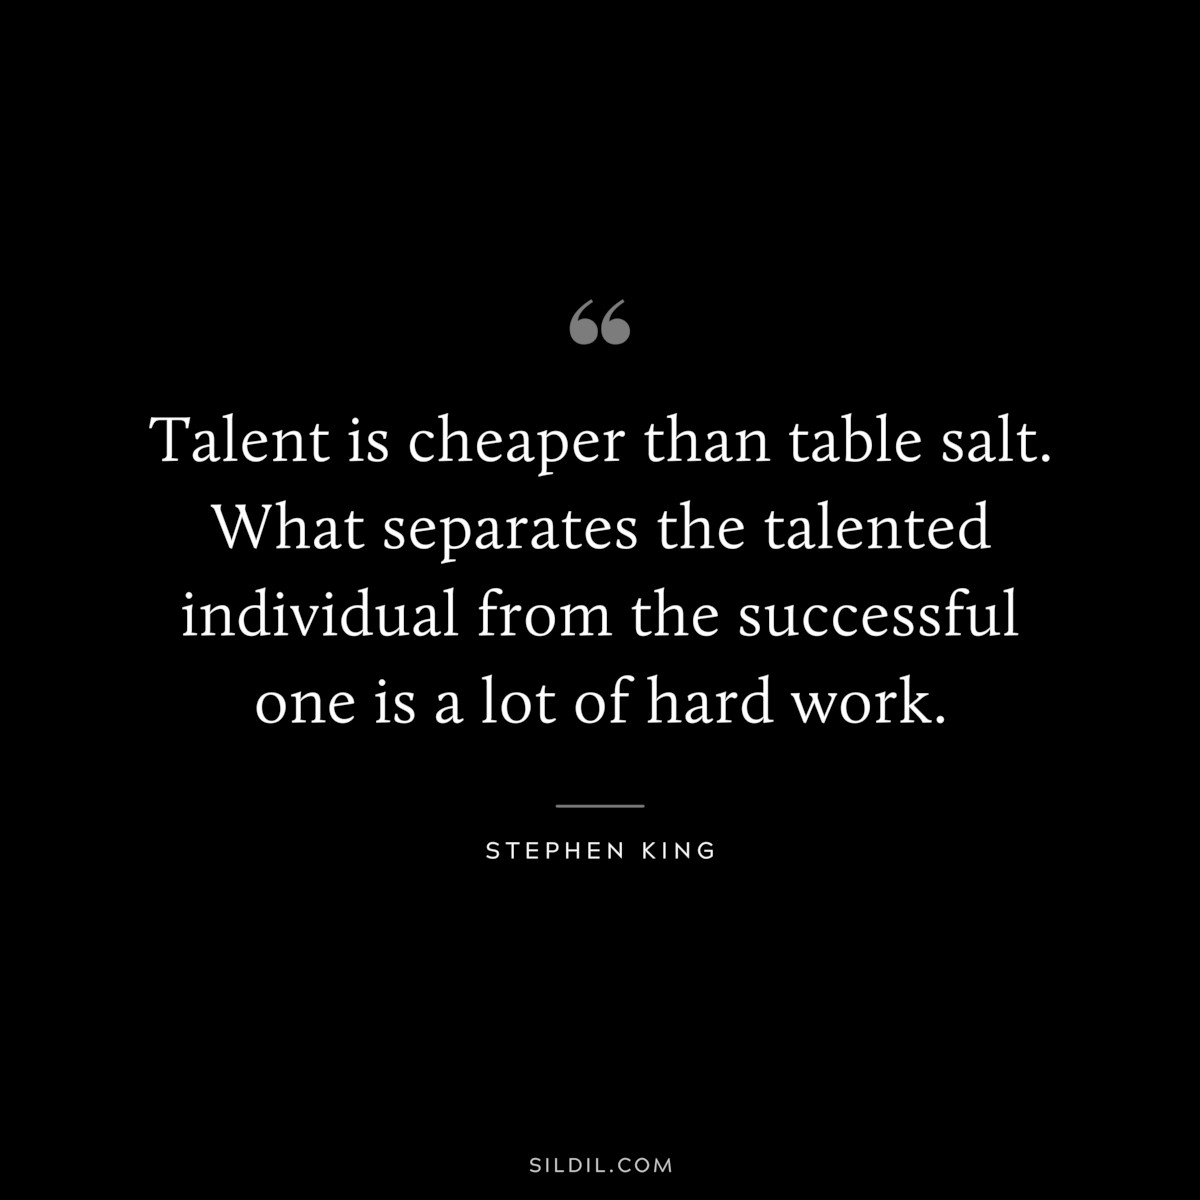 Talent is cheaper than table salt. What separates the talented individual from the successful one is a lot of hard work. ― Stephen King